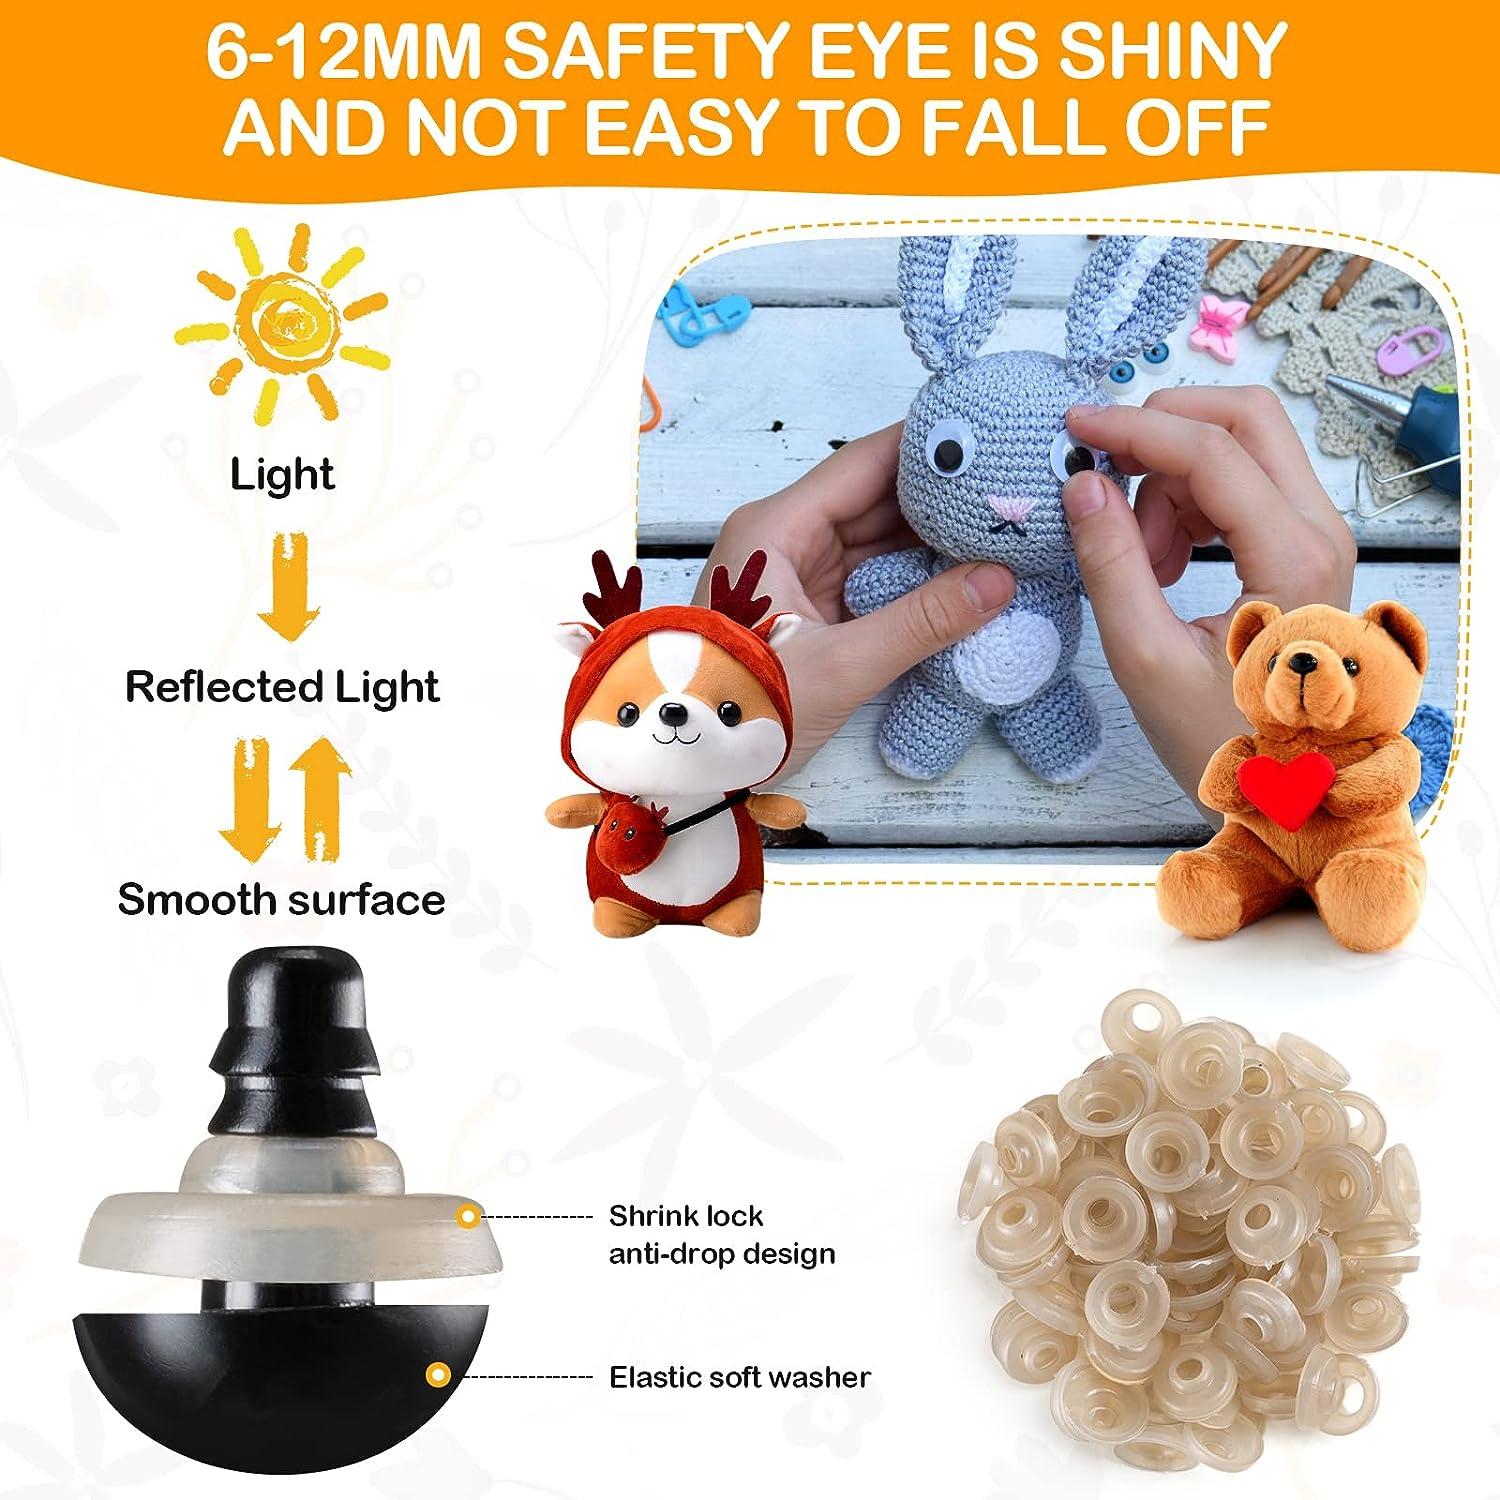 Large Safety Eyes And Nose With Washers For Stuffed Animal Eyes